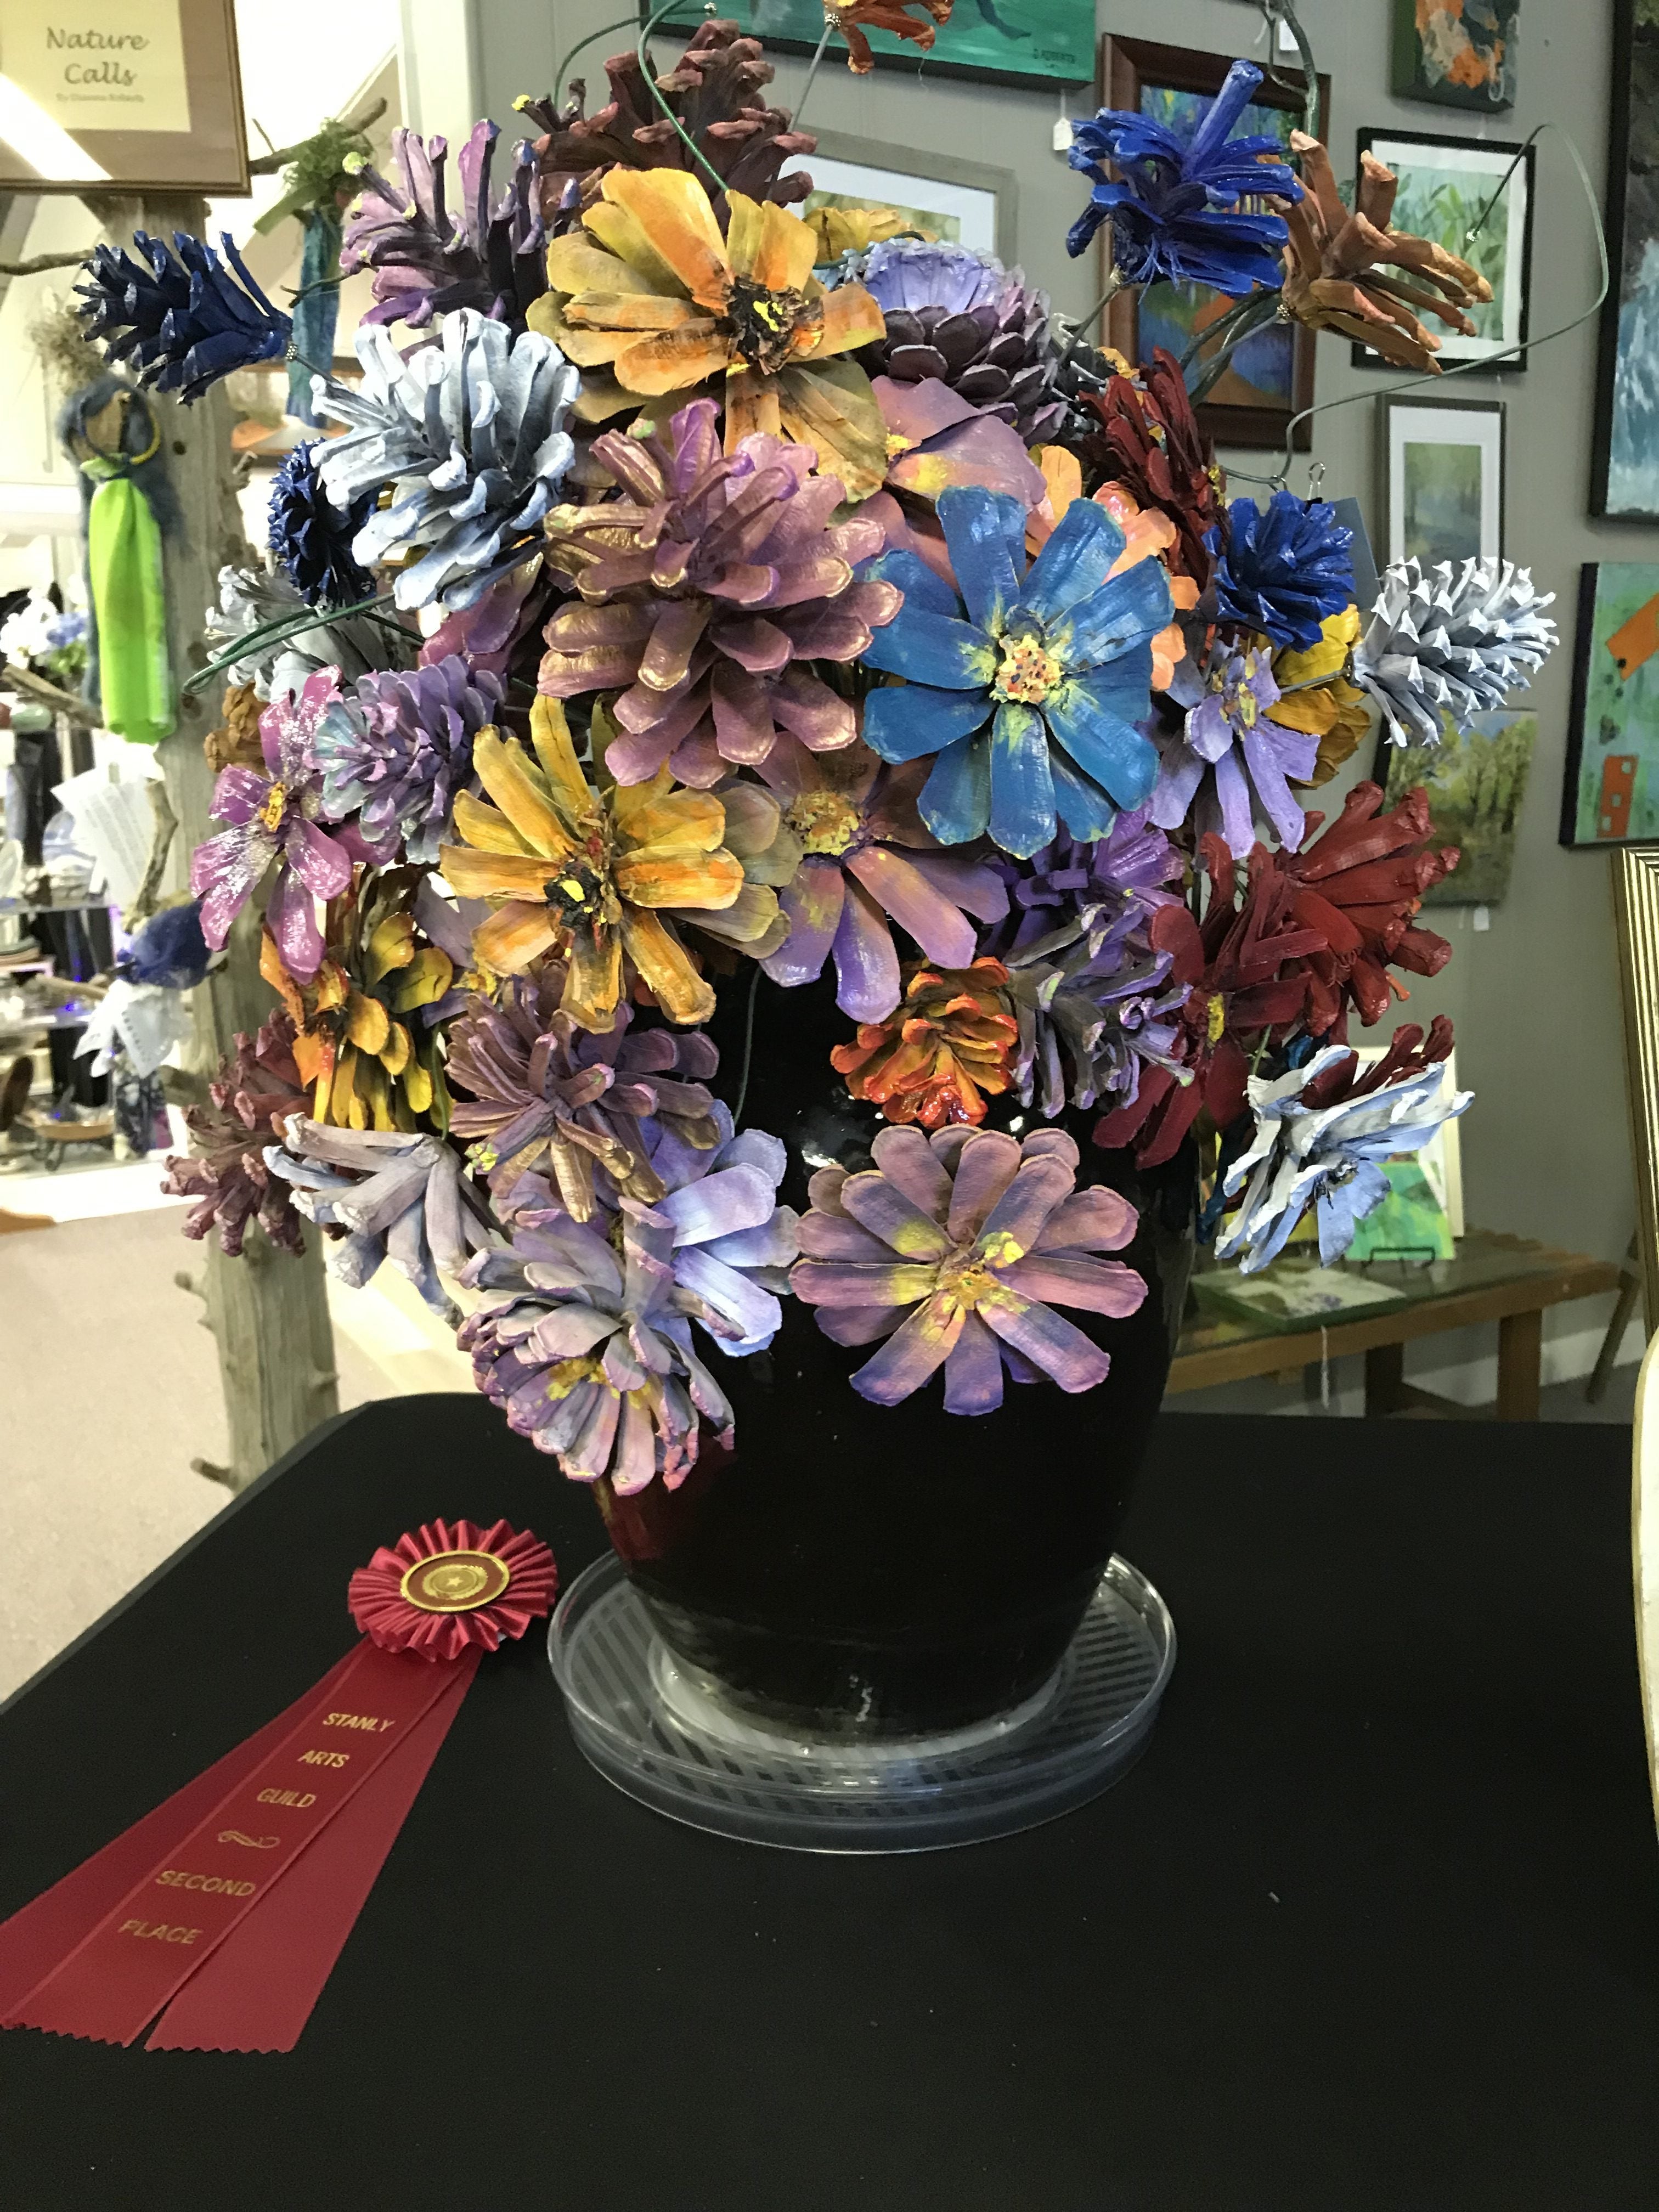 Second place in 3-D was won by Karen W. Lowder for “Fireworks.” (Photo by TOBY THORPE)